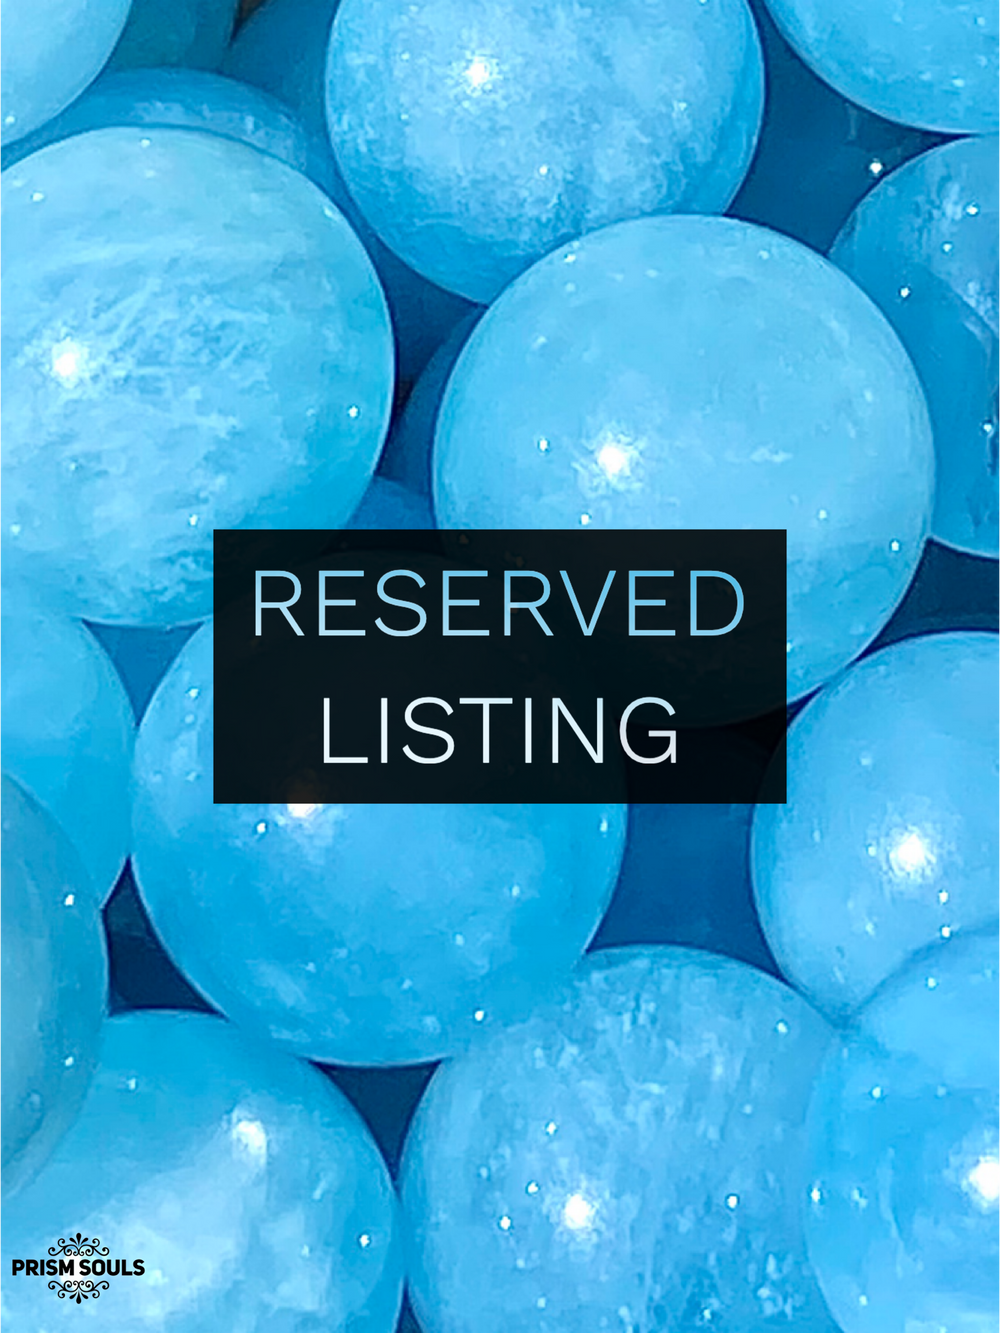 RESERVED LISTING - saryuns